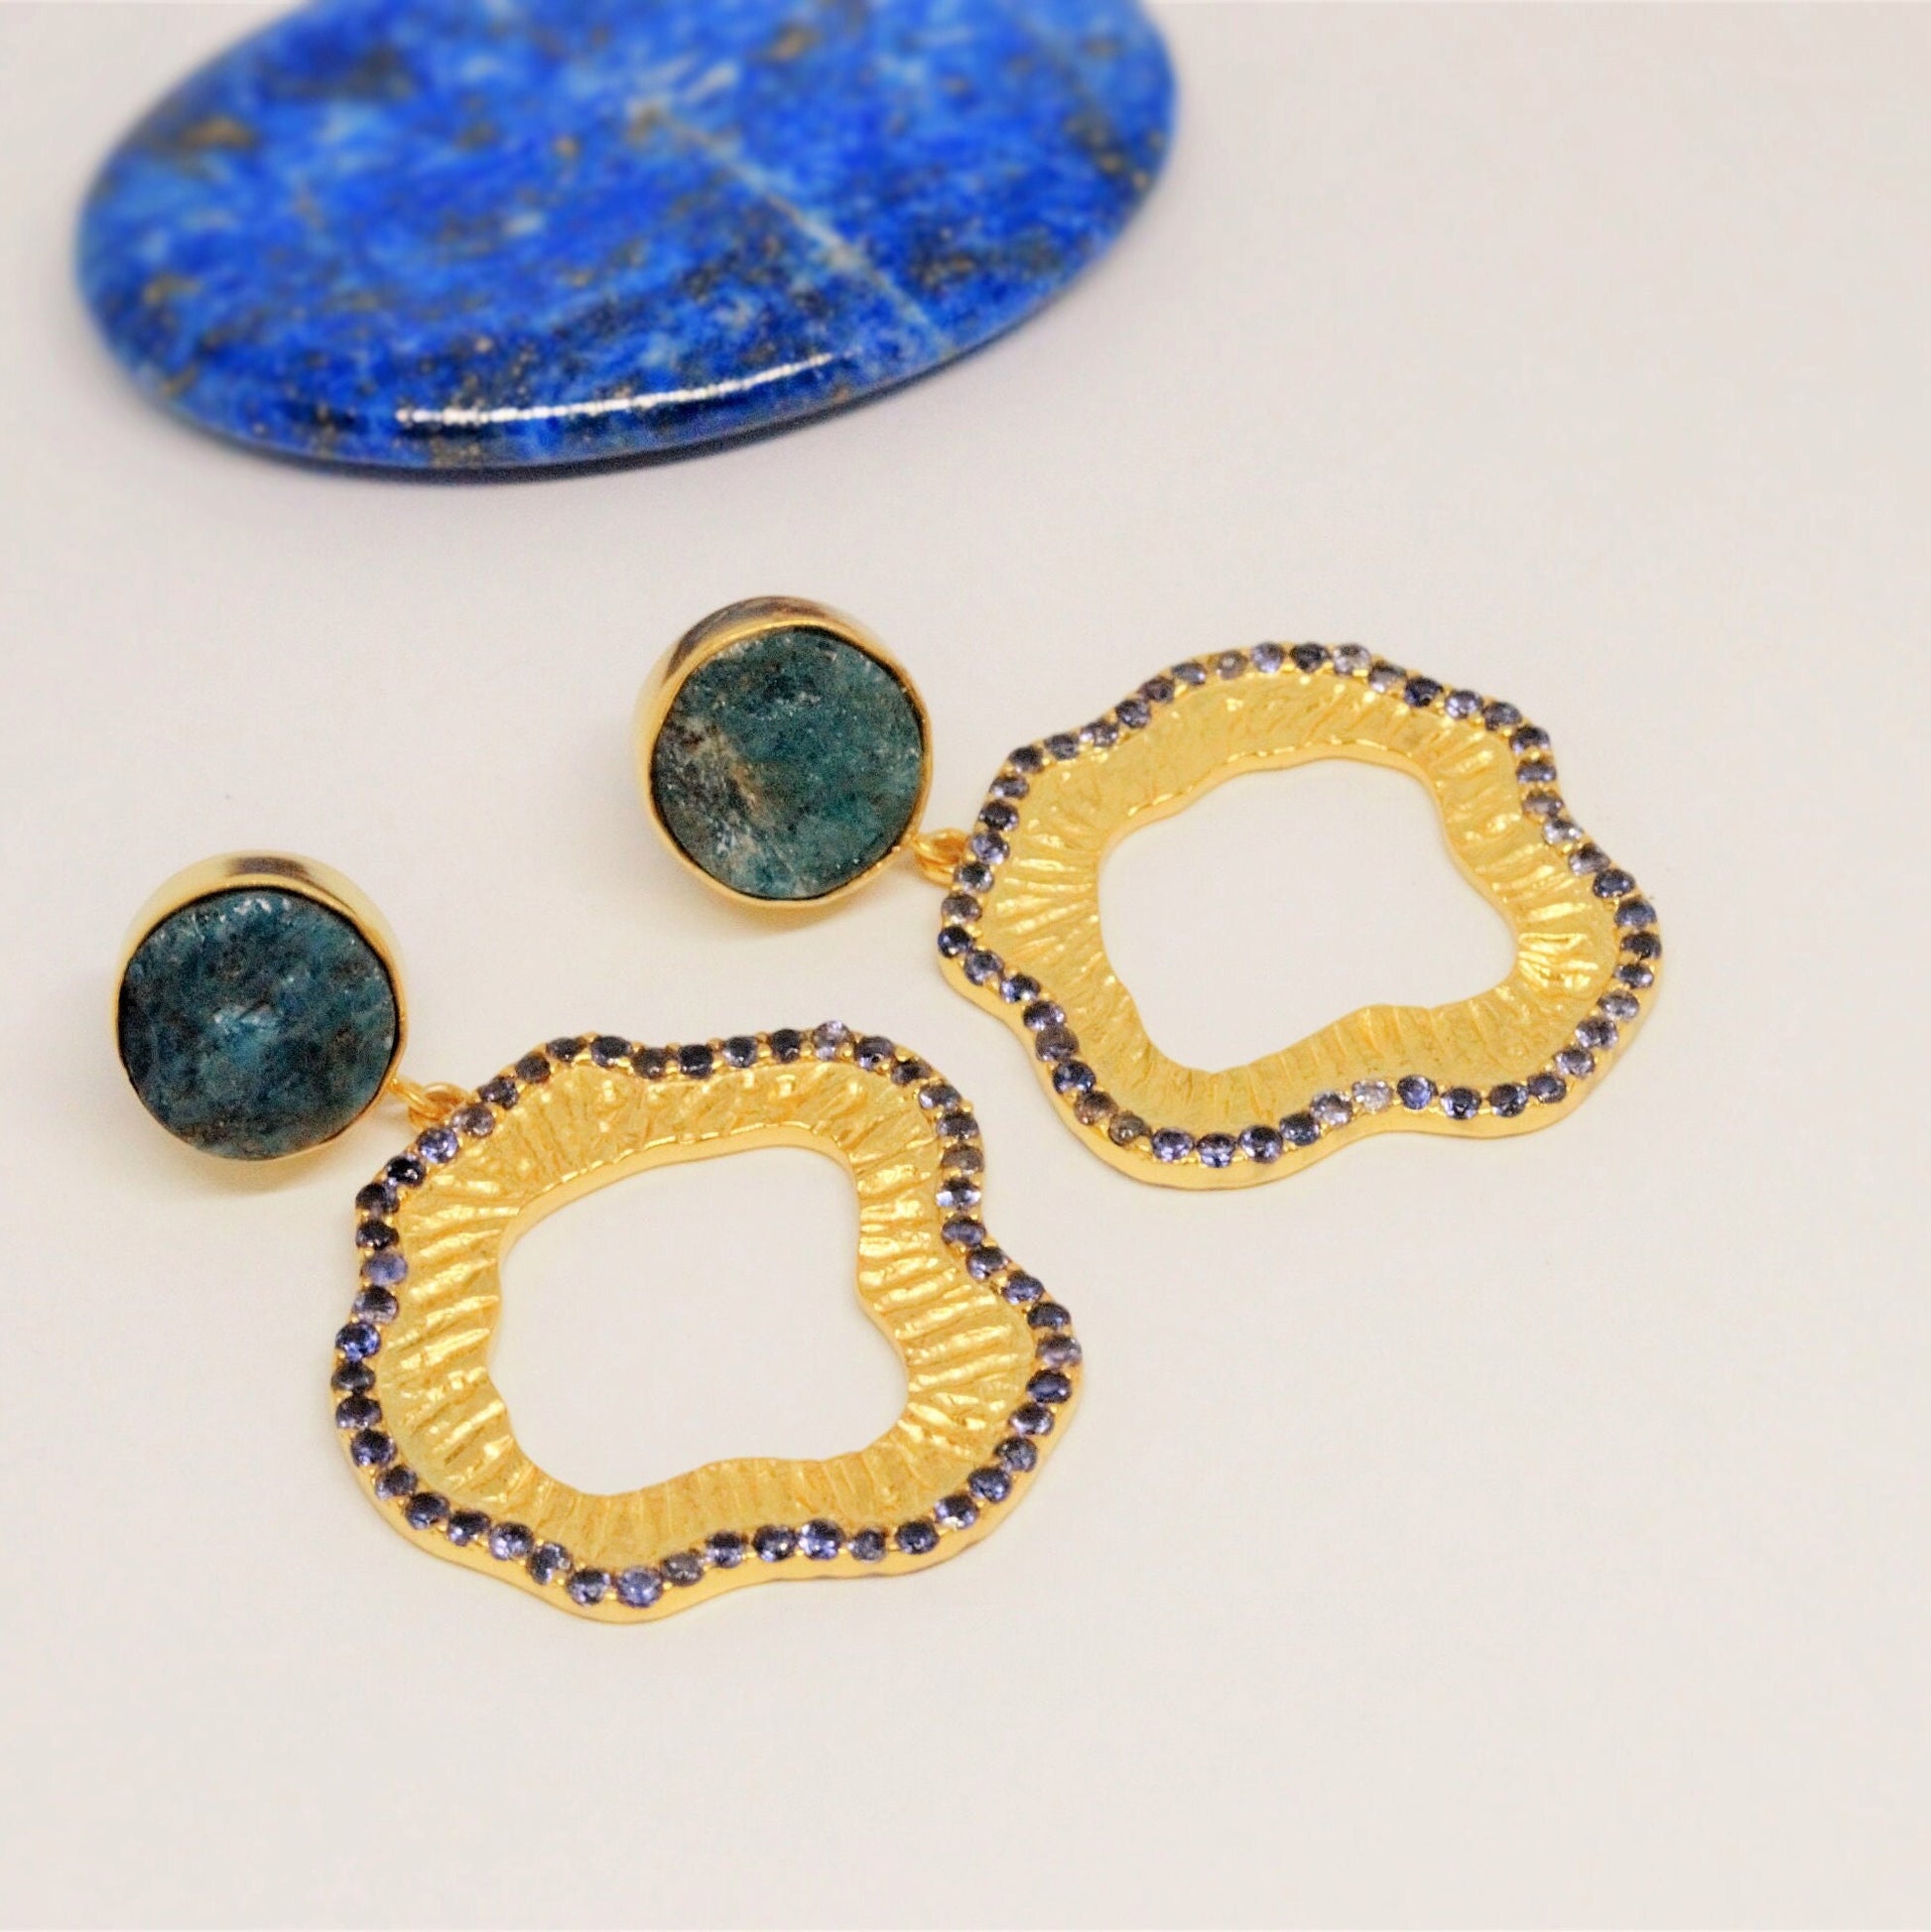 Blue Apatite, Iolite Gold Earrings, Gold Plated 925 Silver Earrings, Unique Statement Earrings, Gift For Her, Indian Jewelry